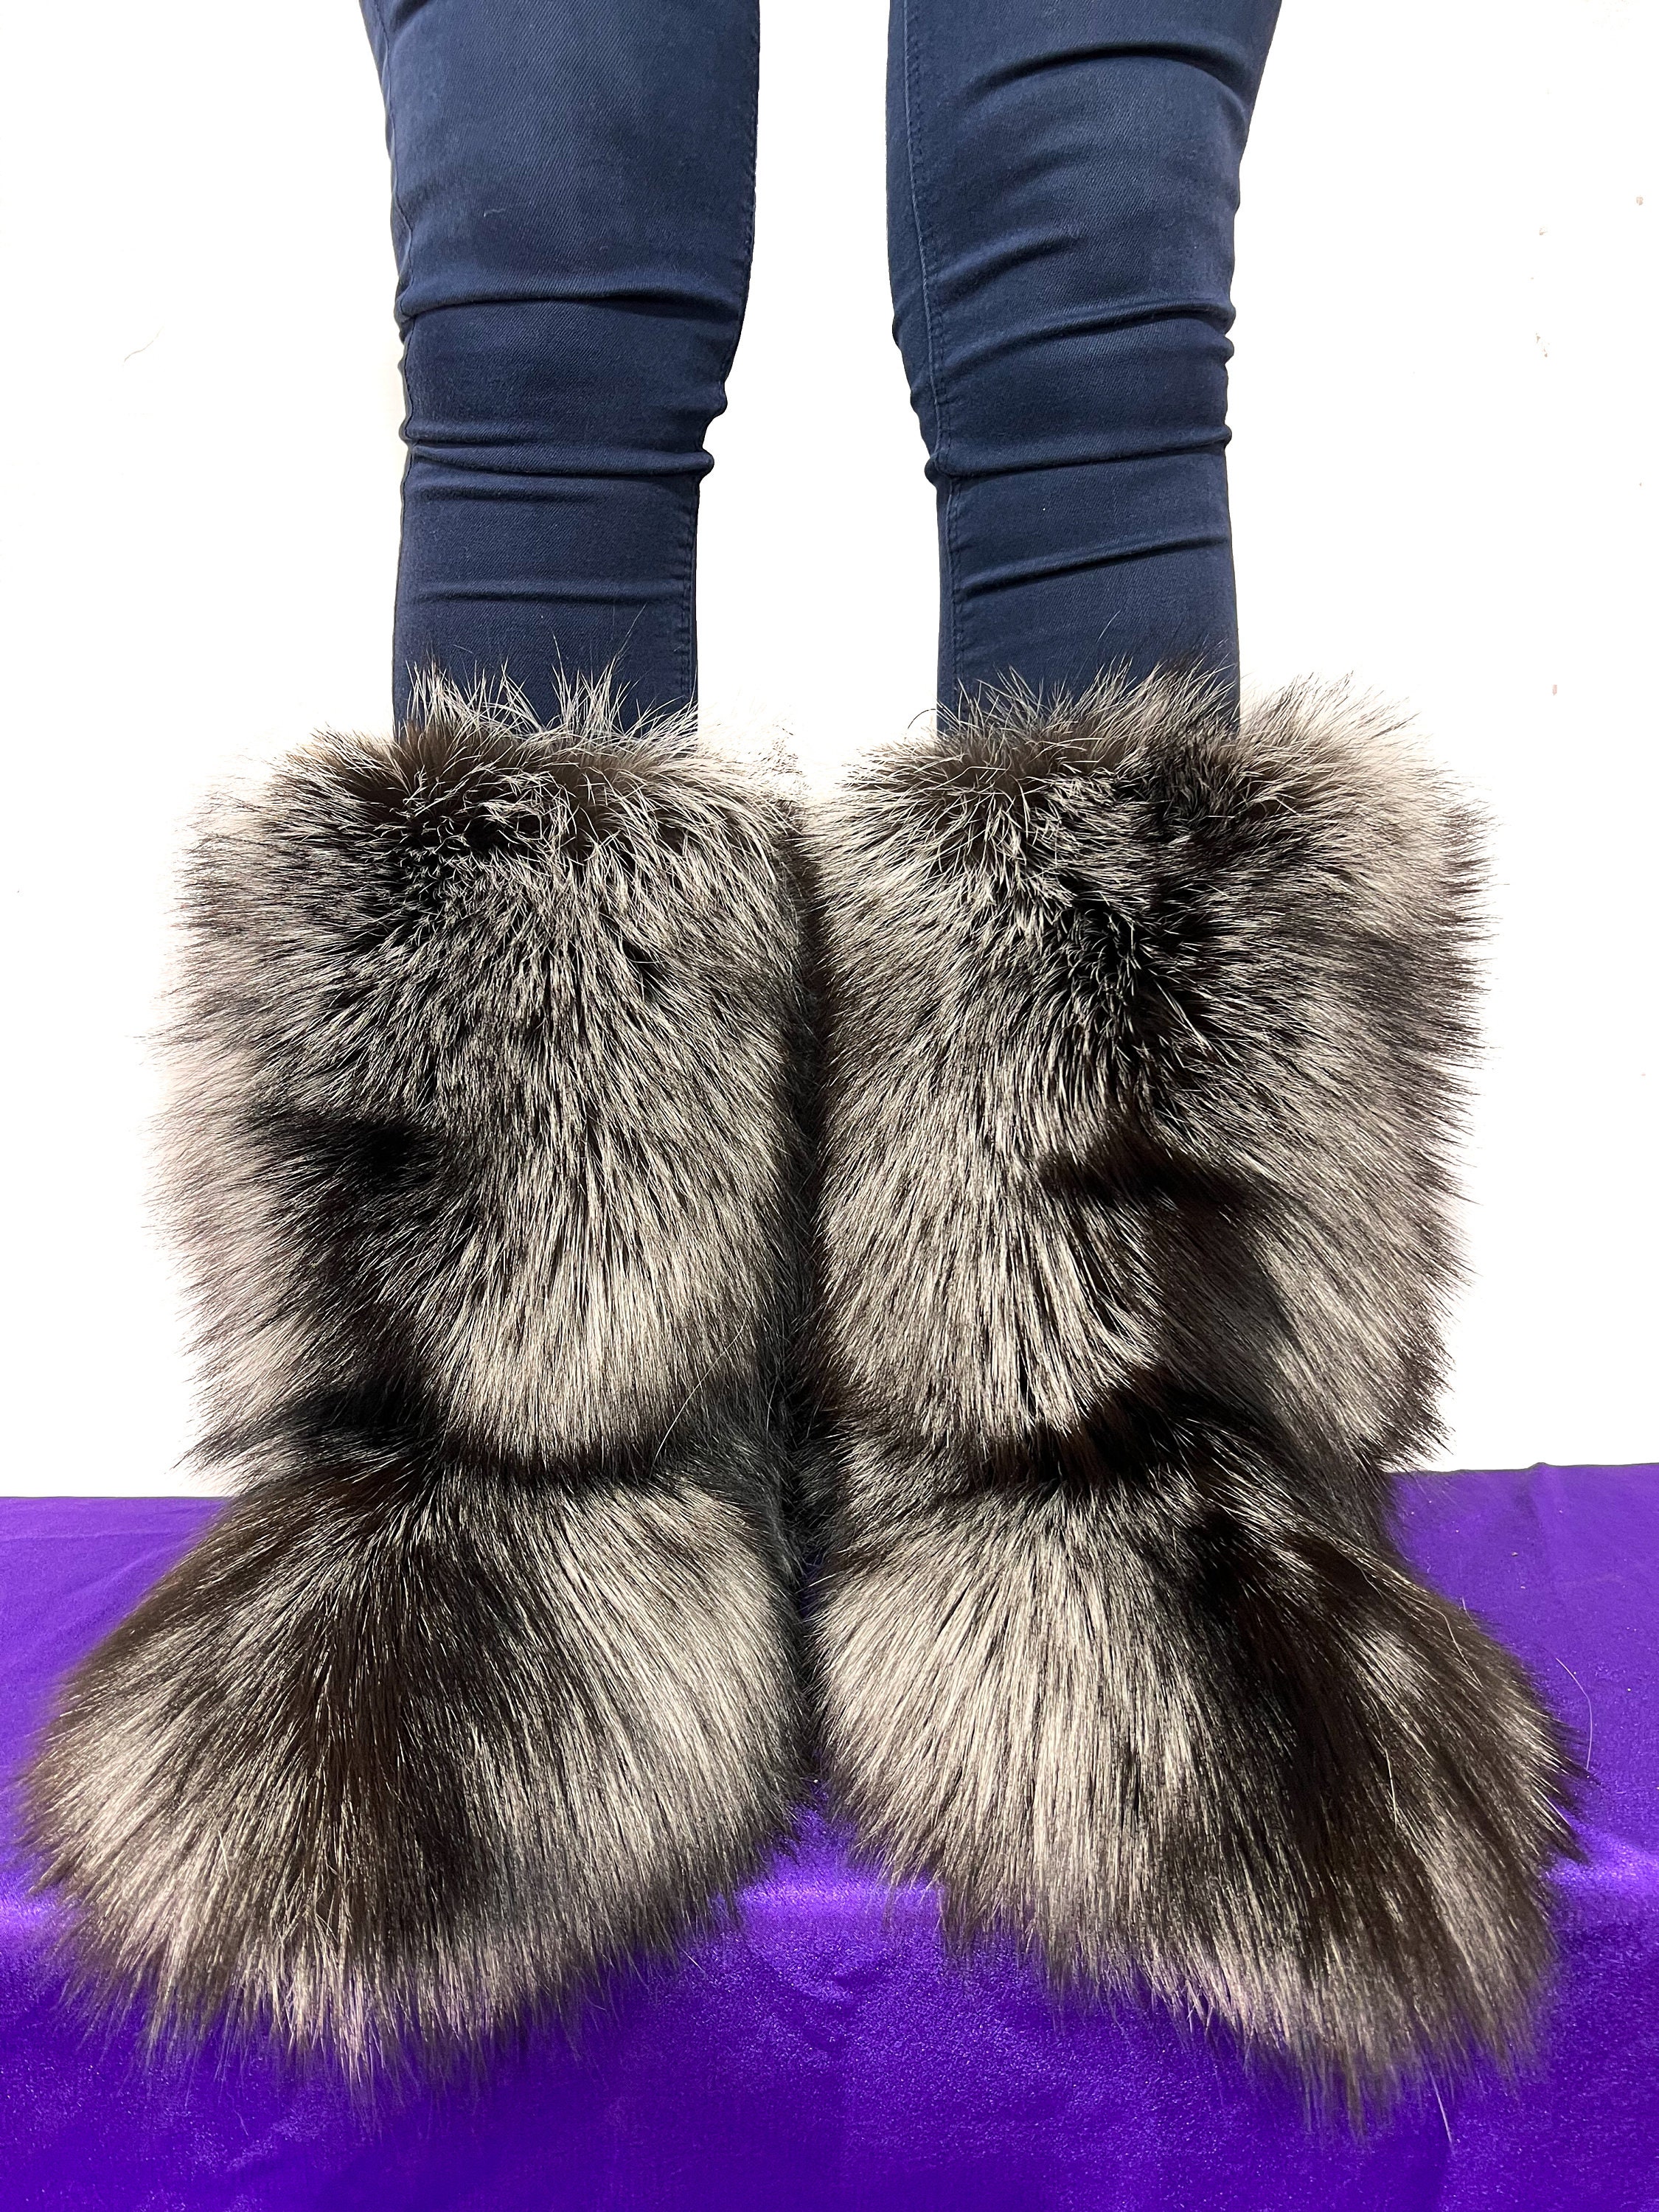 Double-sided Silver Fox Fur Boots for Indoor & Outdoor Natural Colors Fur  Shoes All Inside Lined in Fur - Etsy